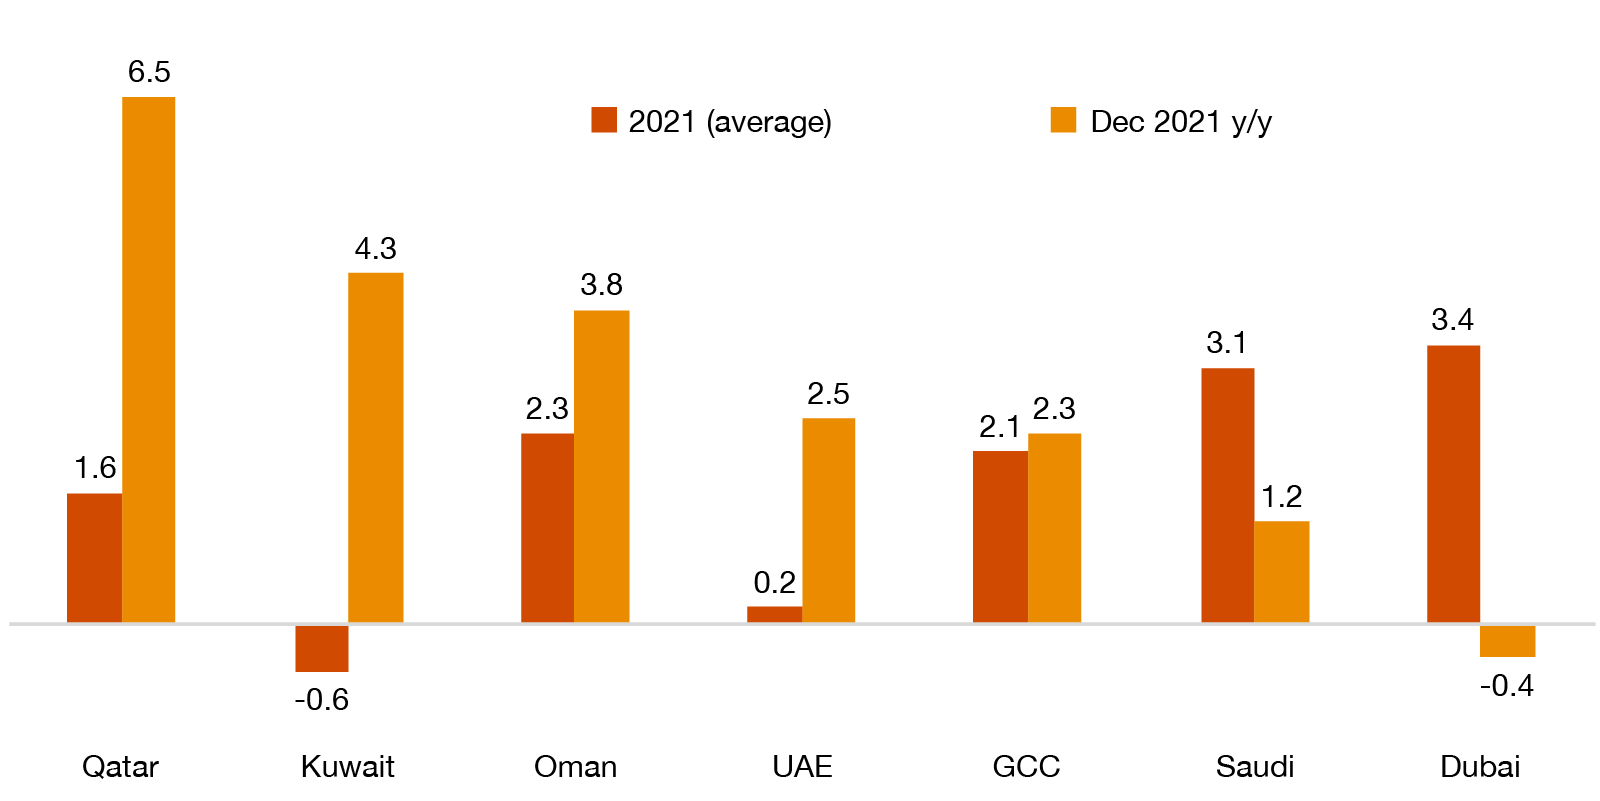 Inflation is a concern for the GCC